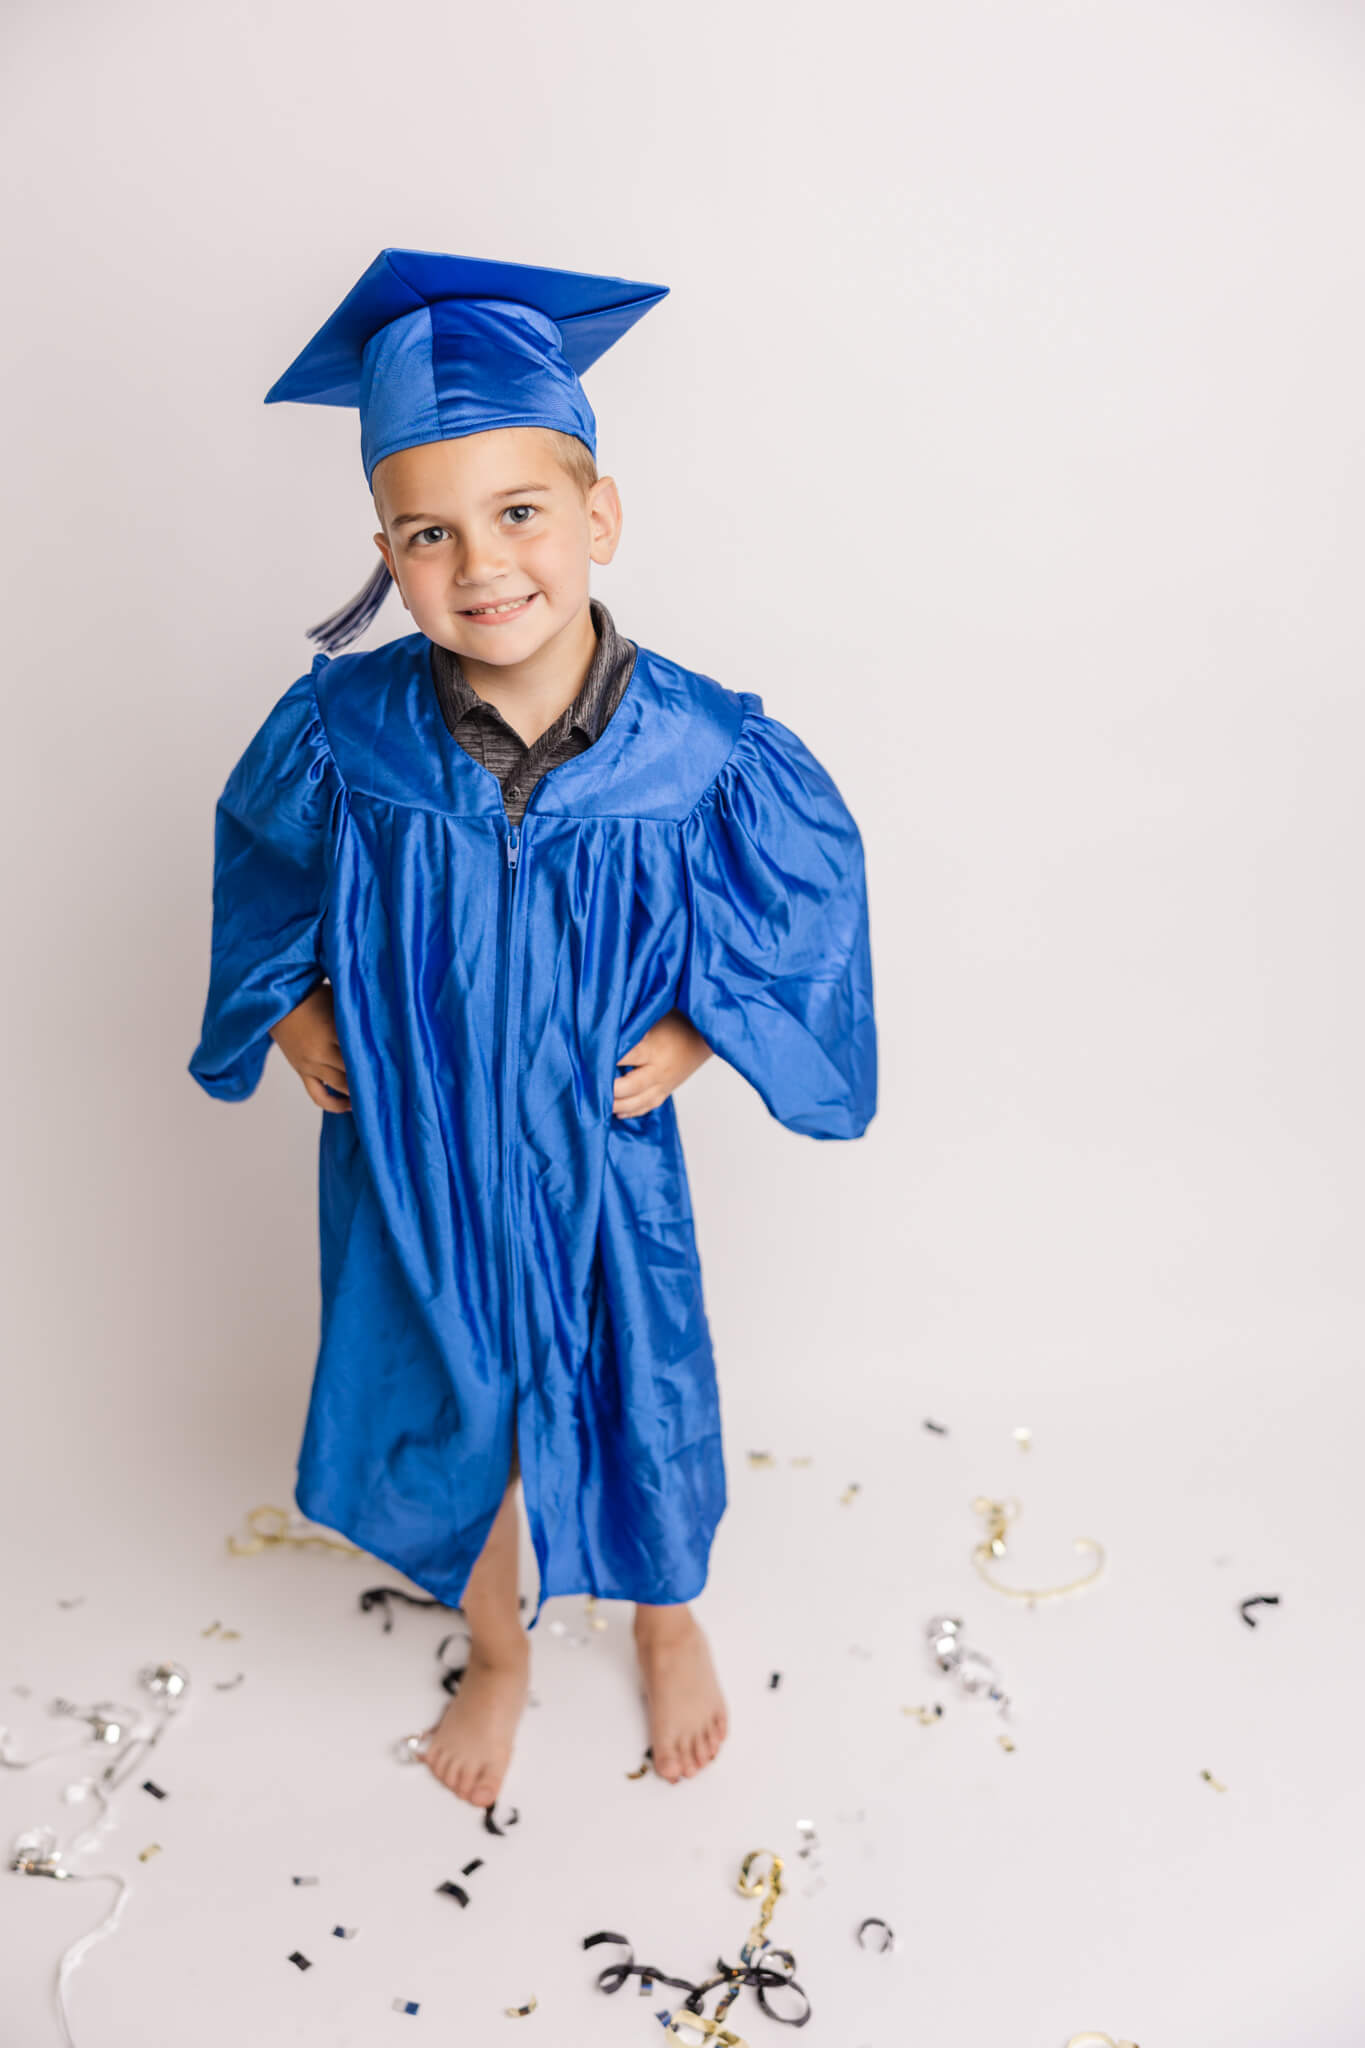 Celebrating the completion of his four year old preschool program captured by molly berry photography. 